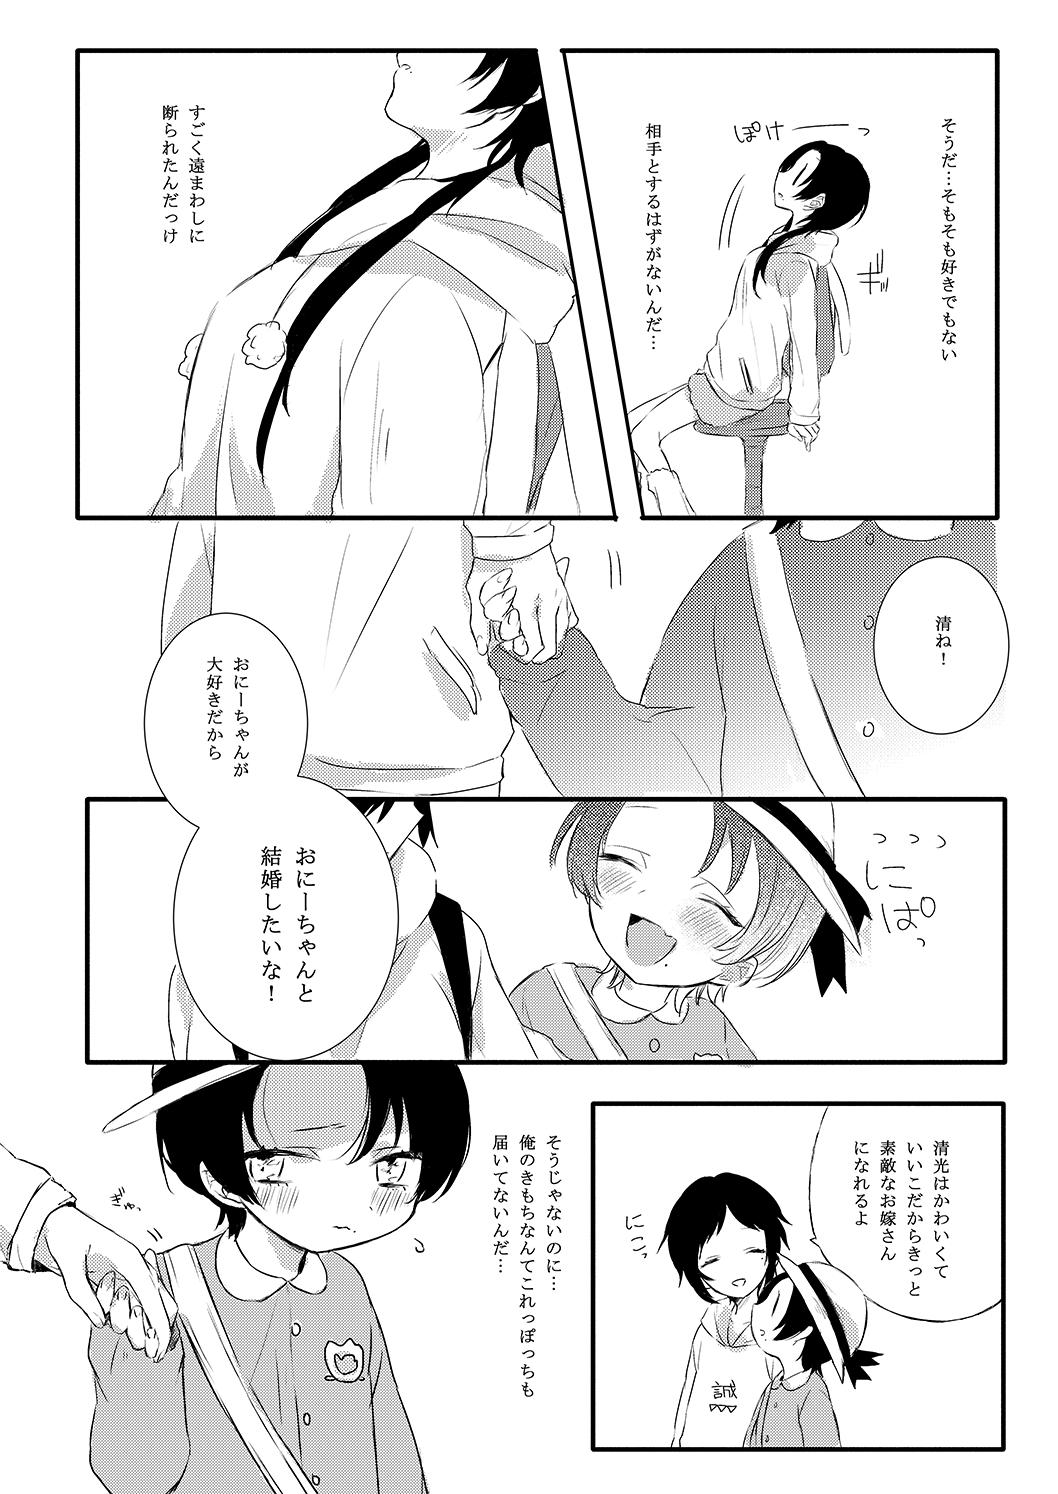 Fucking Pussy BROTHER COMPLEX + SISTER COMPLEX - Touken ranbu Deutsche - Page 7